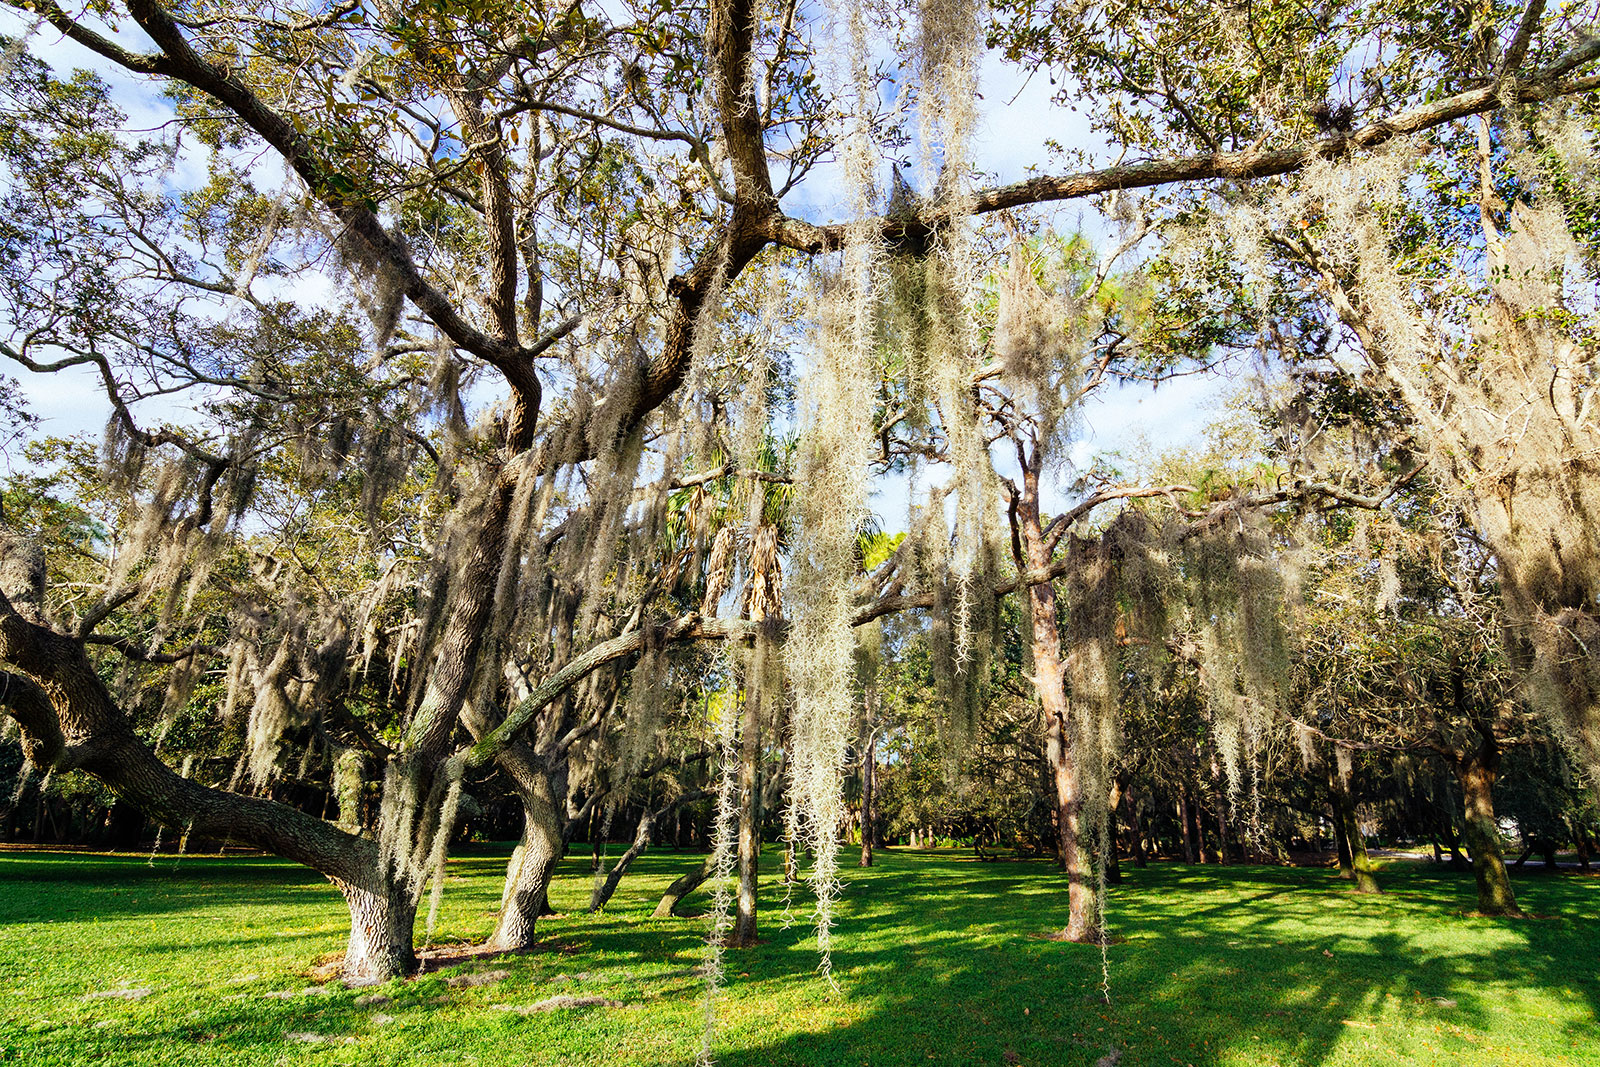 Spanish moss (Tillandsia usneoides) hanging from tree branches in a park